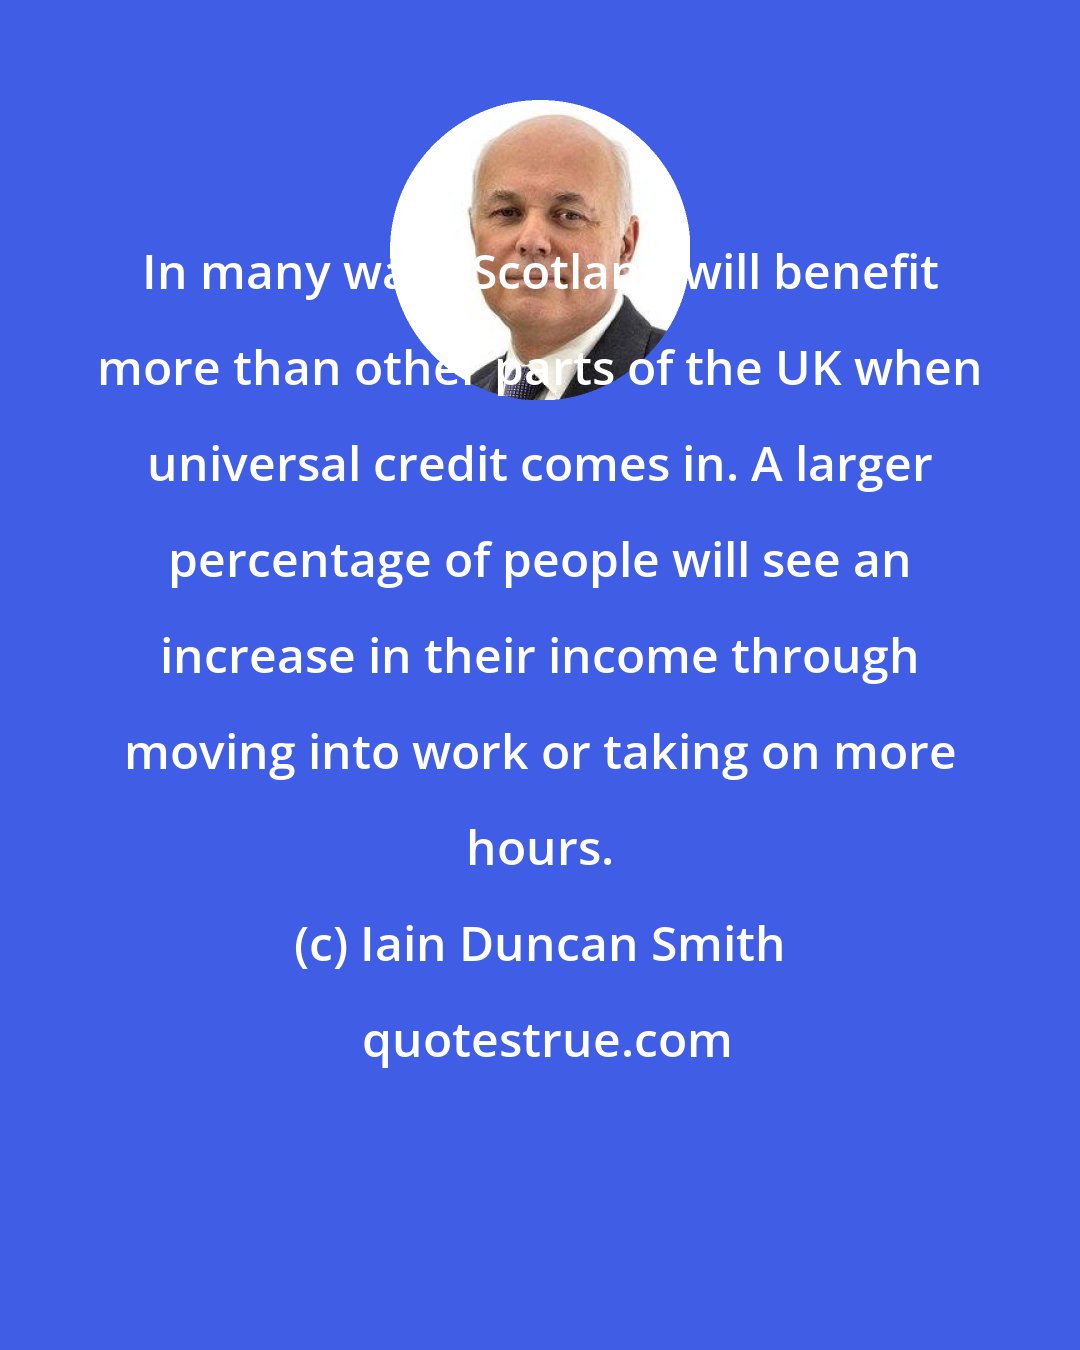 Iain Duncan Smith: In many ways Scotland will benefit more than other parts of the UK when universal credit comes in. A larger percentage of people will see an increase in their income through moving into work or taking on more hours.